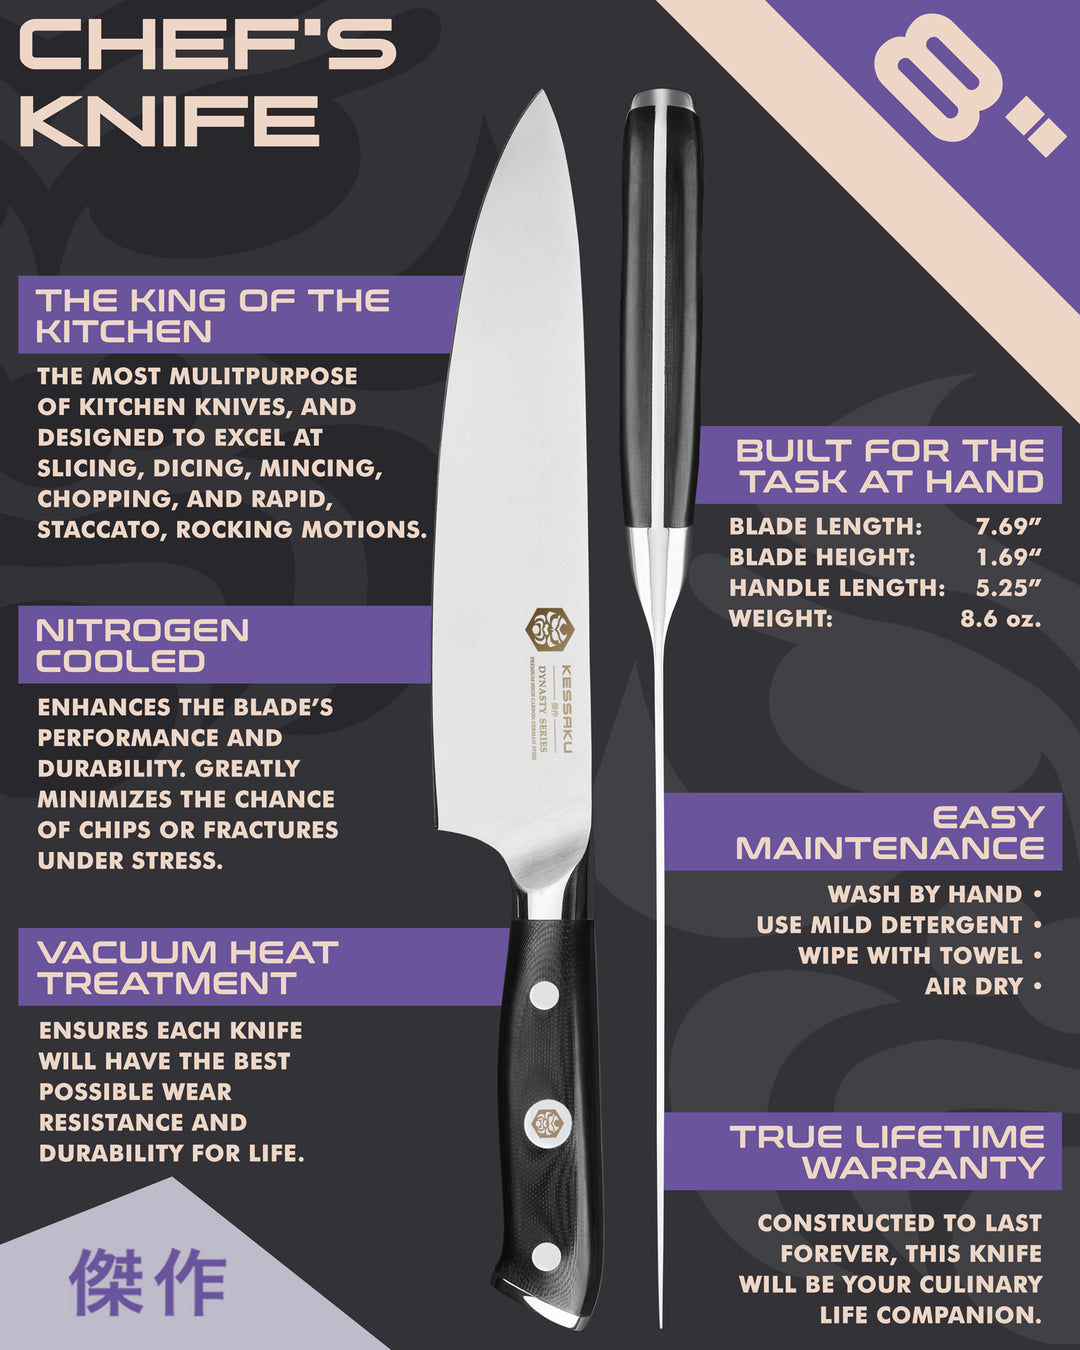 Kessaku Dynasty Series Chef's Knife uses, dimensions, maintenance, warranty info, and additional blade treatments